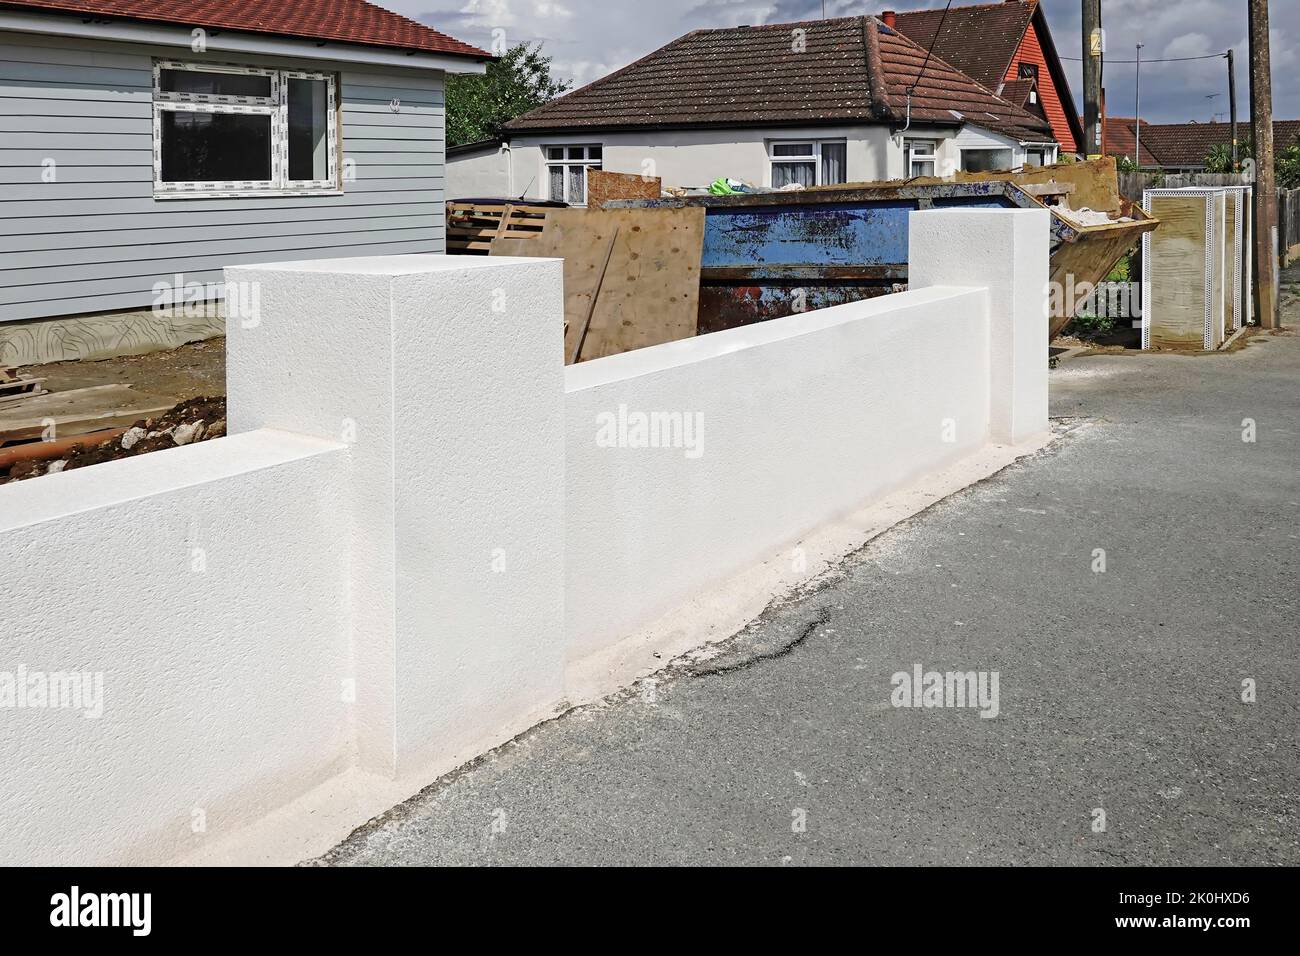 Monocouche through colour render finish on part of front concrete boundary wall also using white plastic non rust arris beads to new build bungalow UK Stock Photo